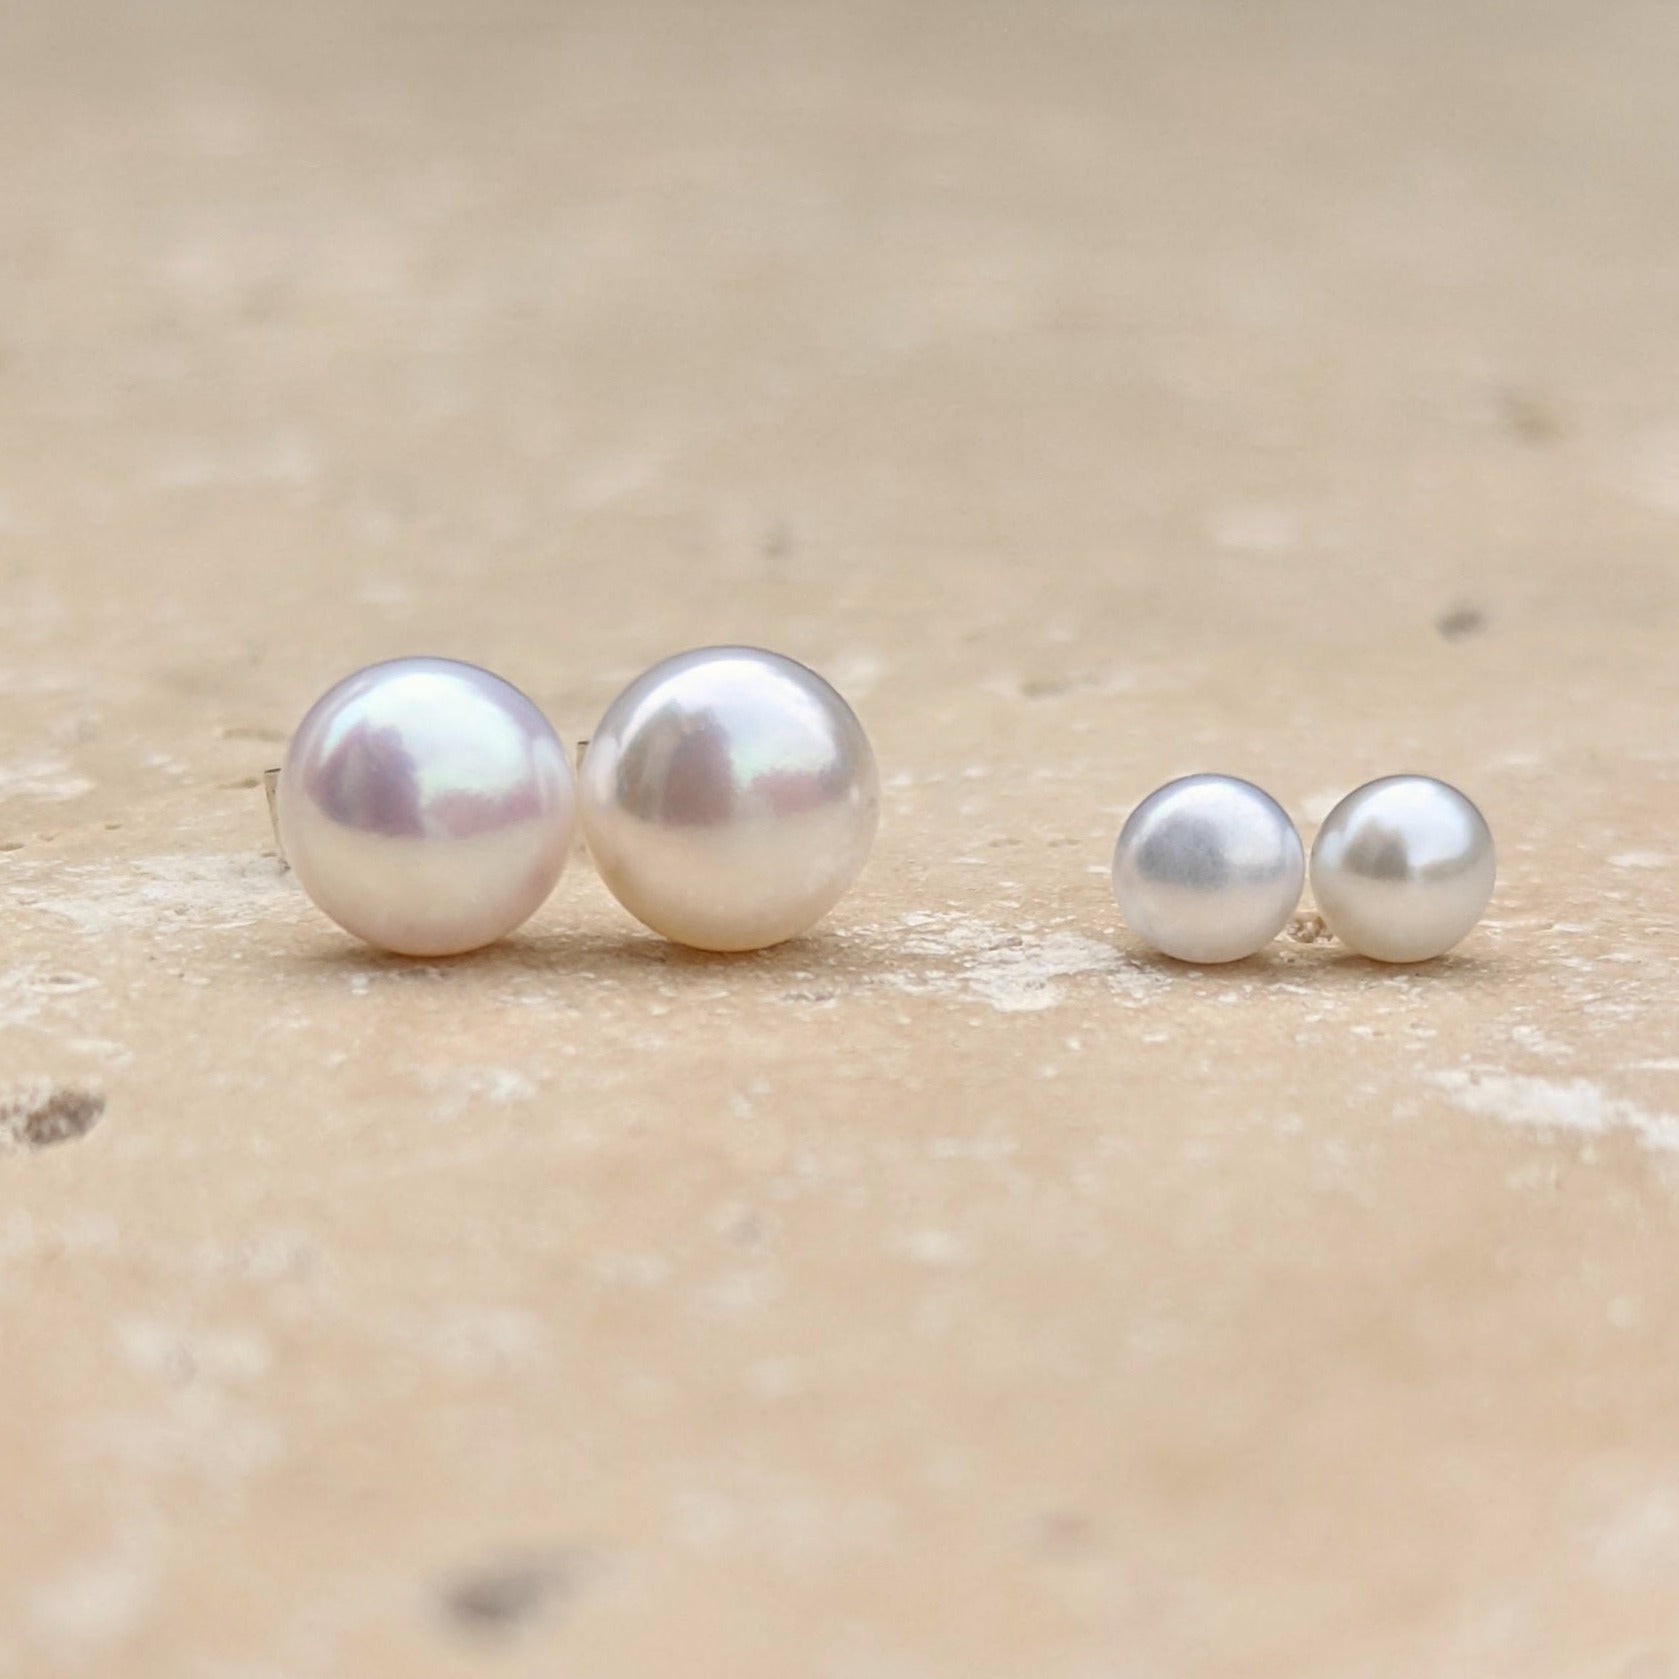 Size comparison between two pairs of round pearl earrings